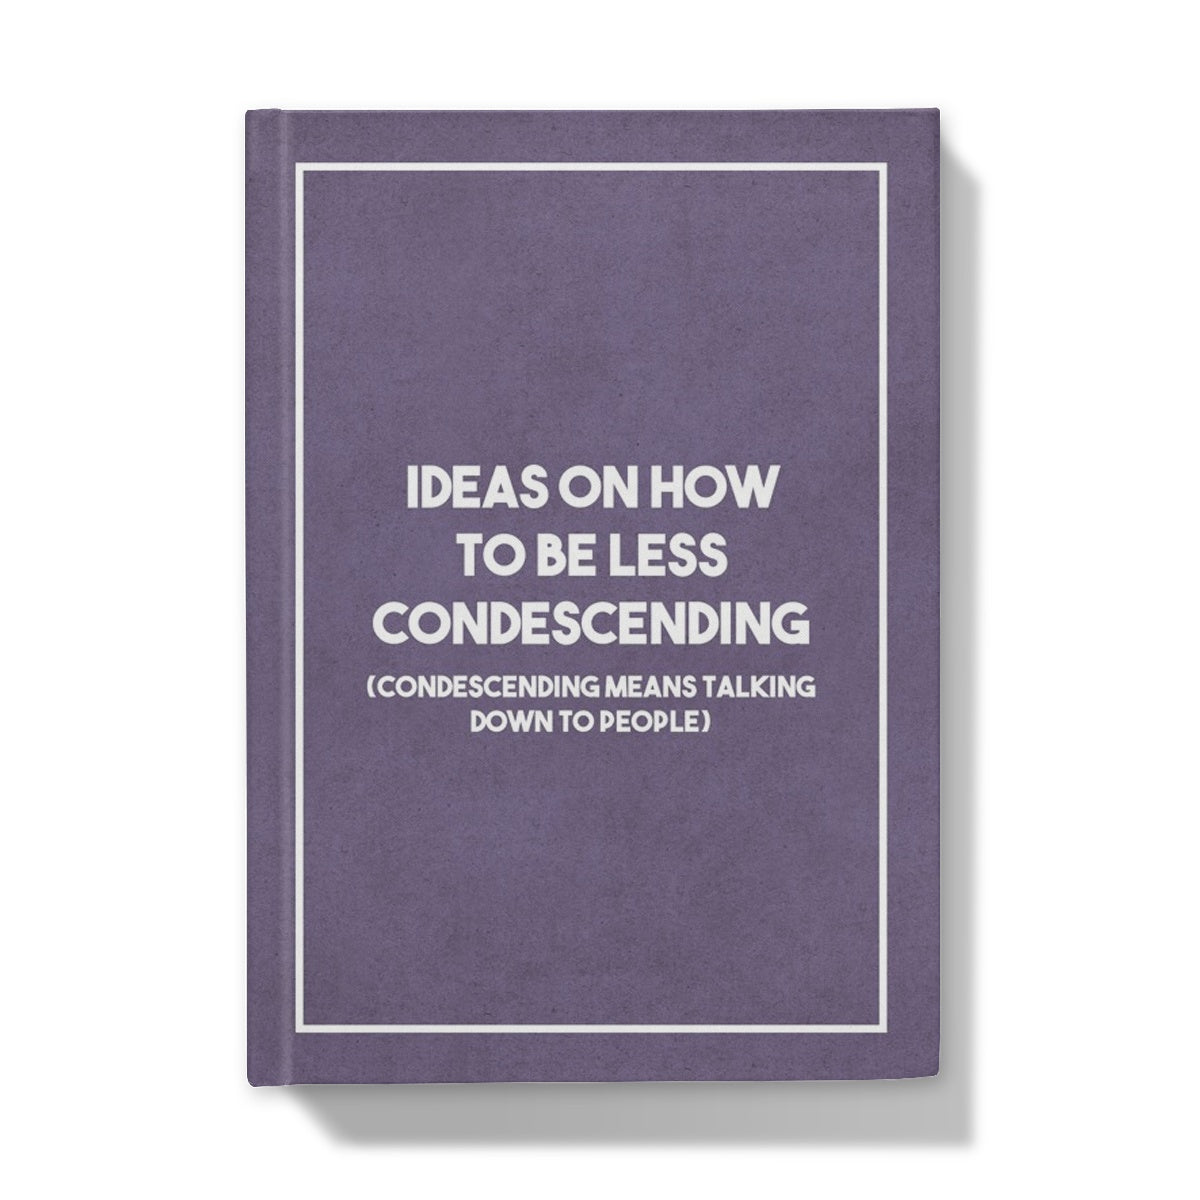 Ideas on how to be less condescending - Anteckningsbok